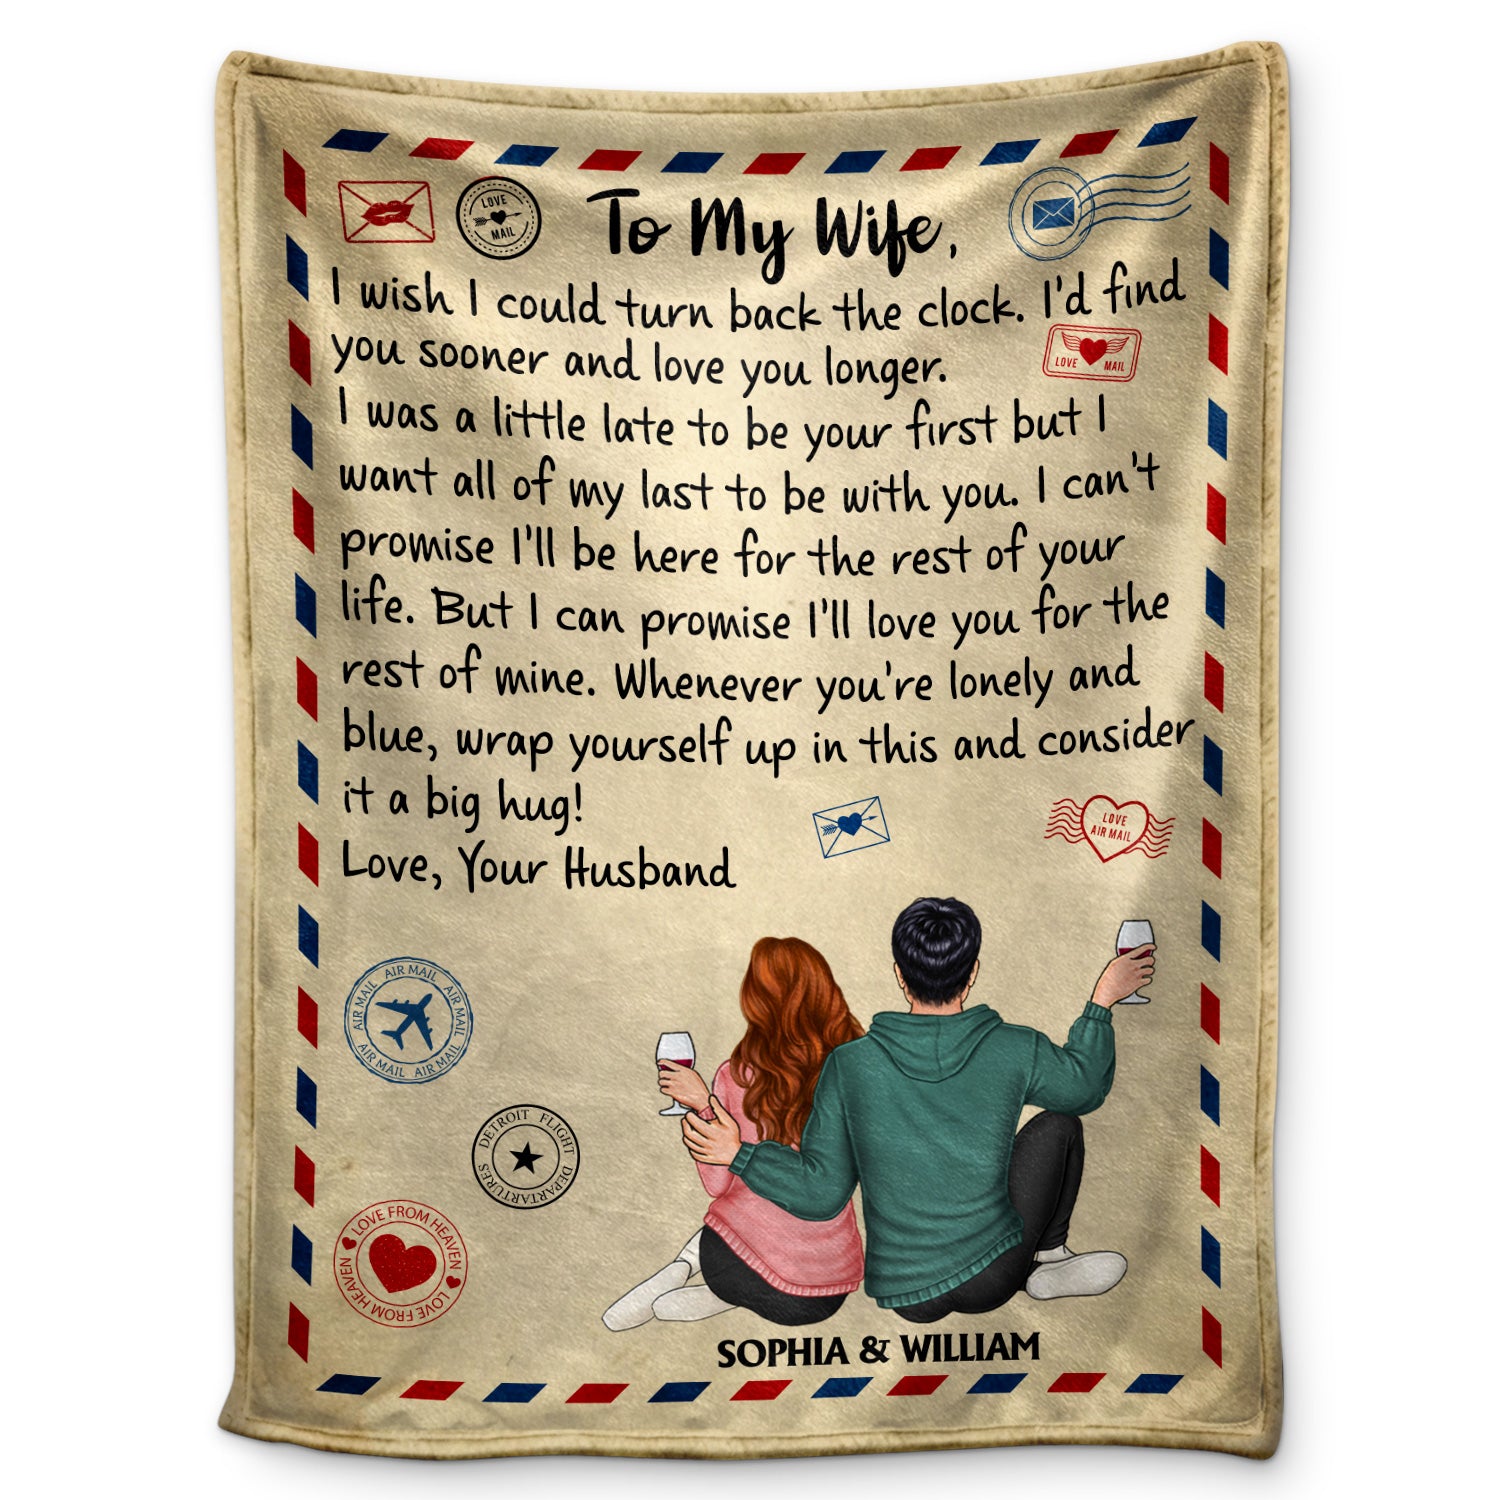 Turn Back The Clock - Gift For Couples, Husband, Wife, Family - Personalized Fleece Blanket